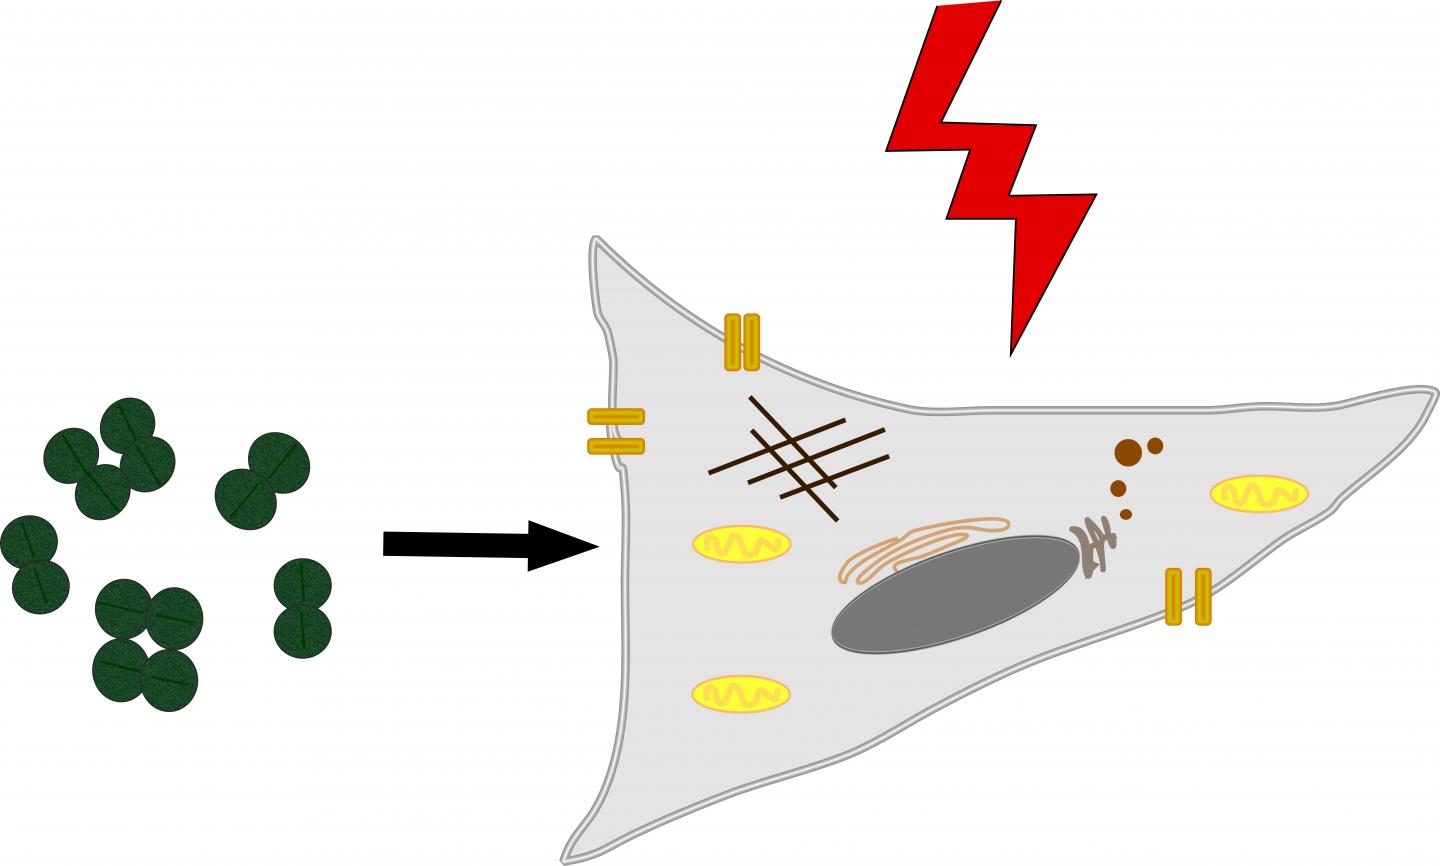 New Optogenetic Tool using Red Light